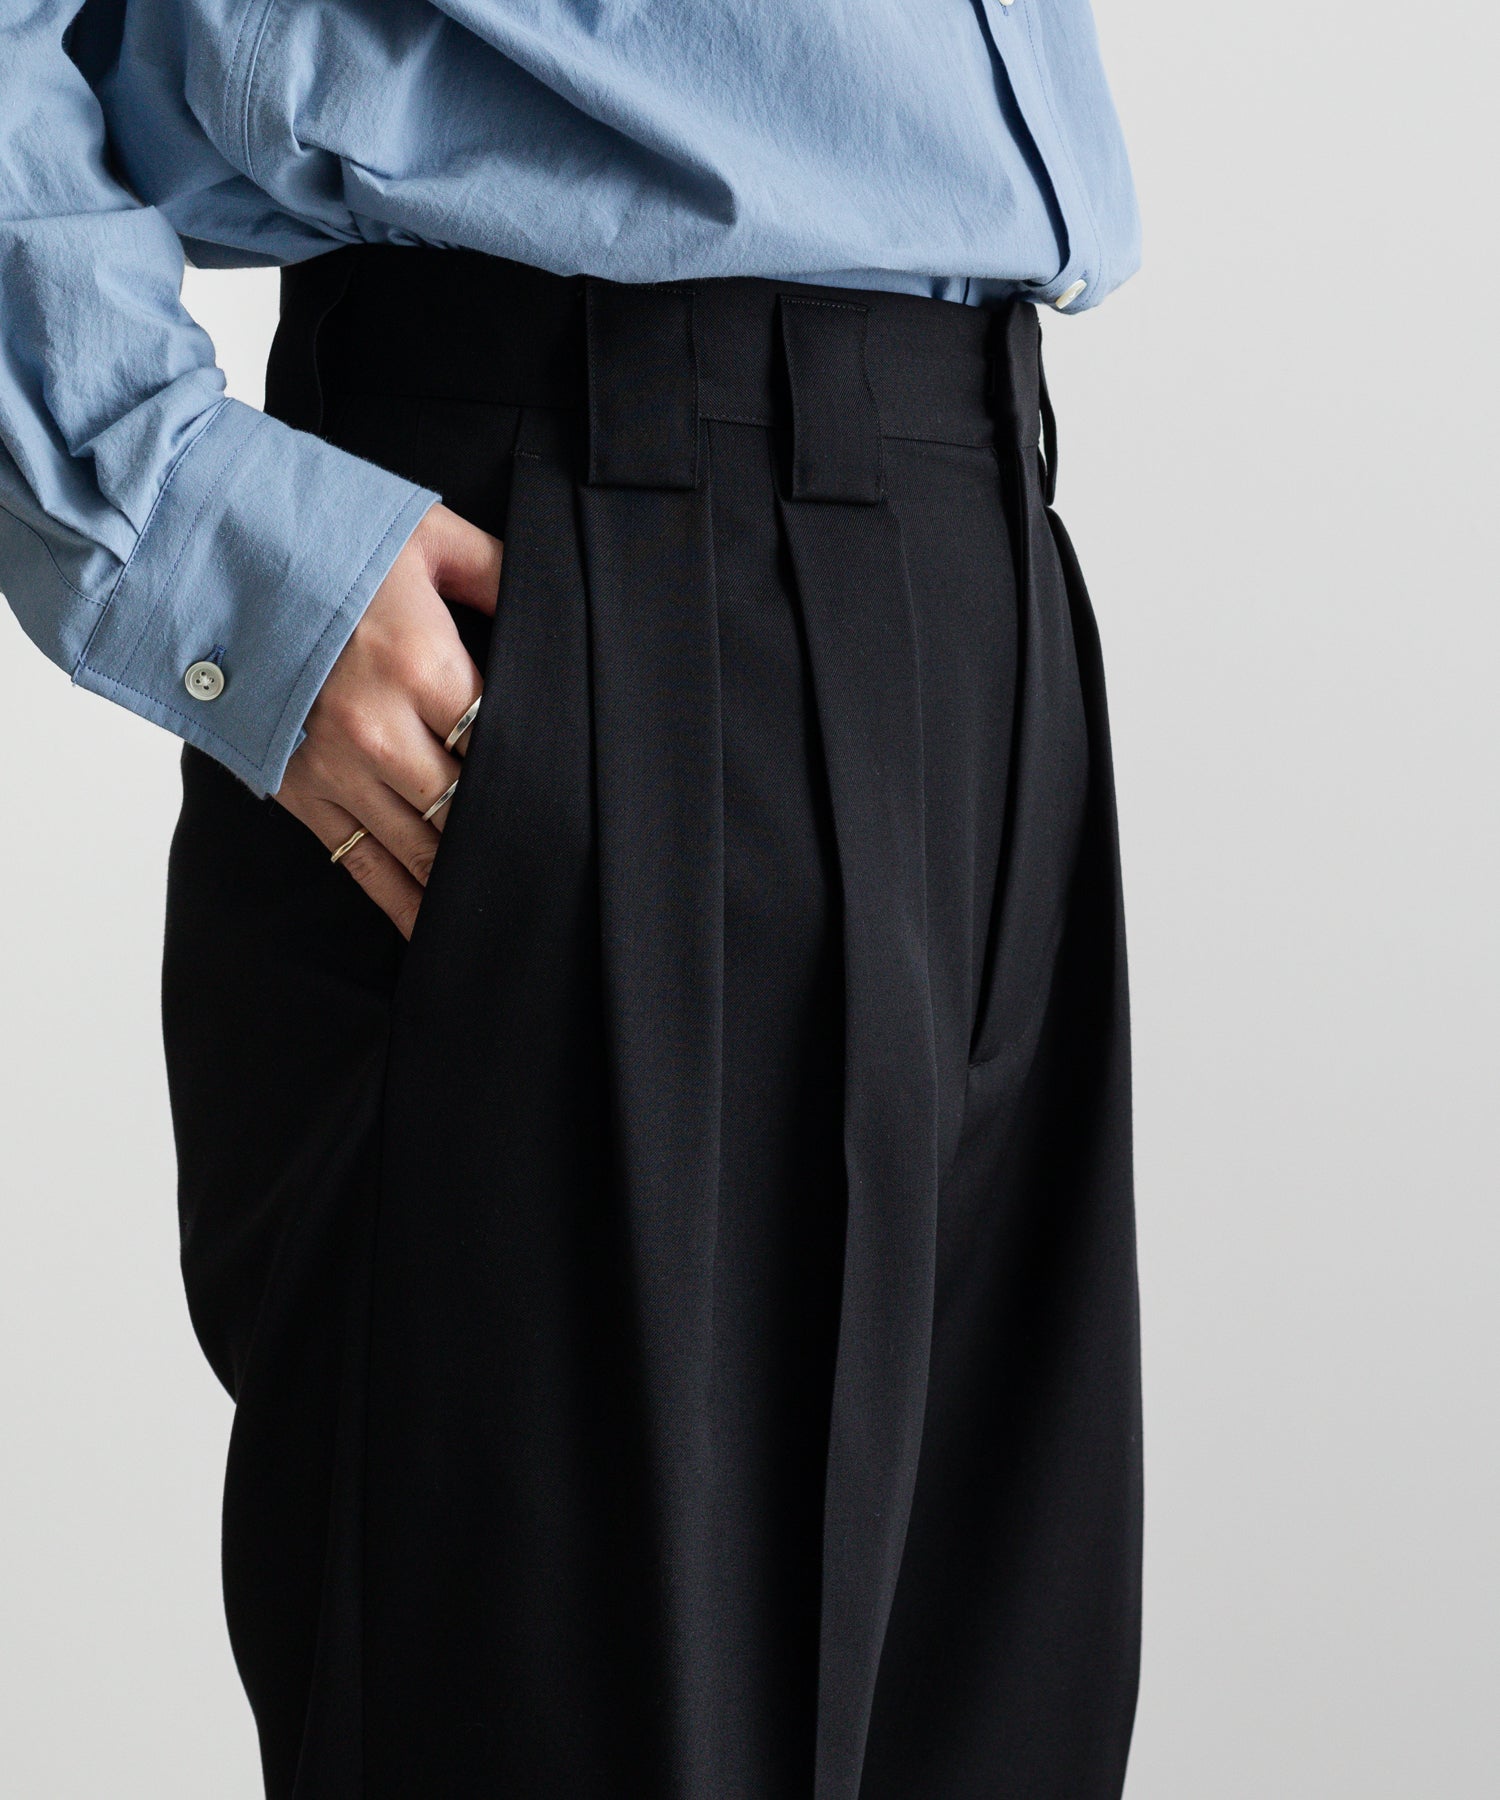 stein / シュタイン】DOUBLE WIDE TROUSERS - BLACK | 公式通販サイト